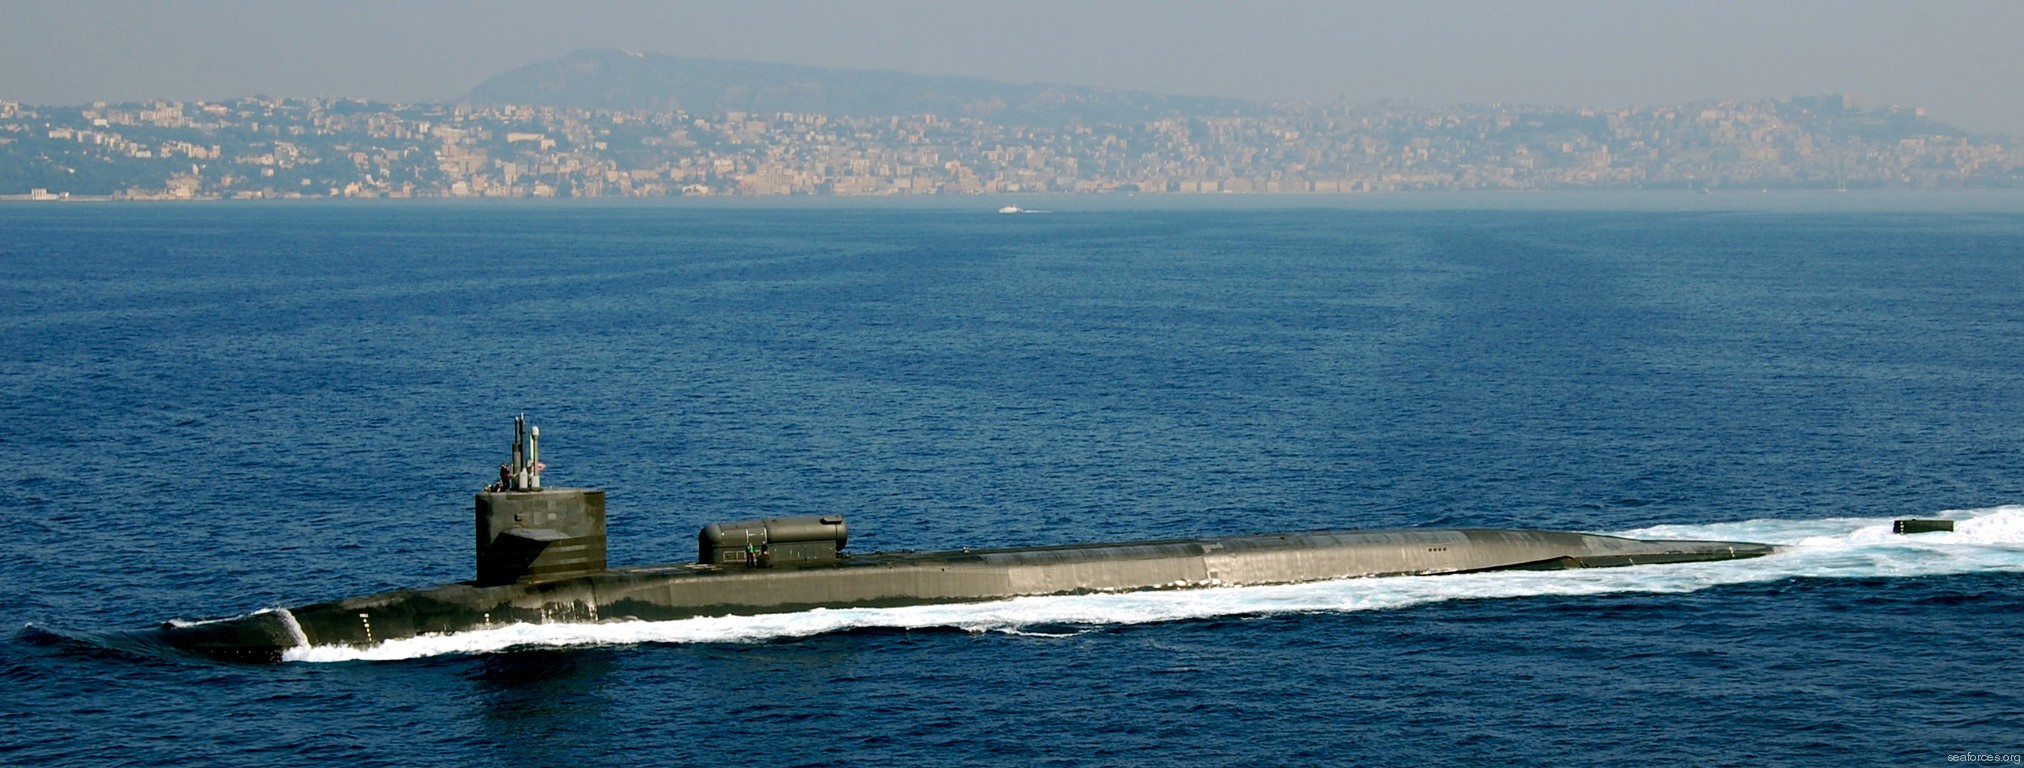 ssgn-729 uss georgia guided missile submarine 2009 23 naples italy